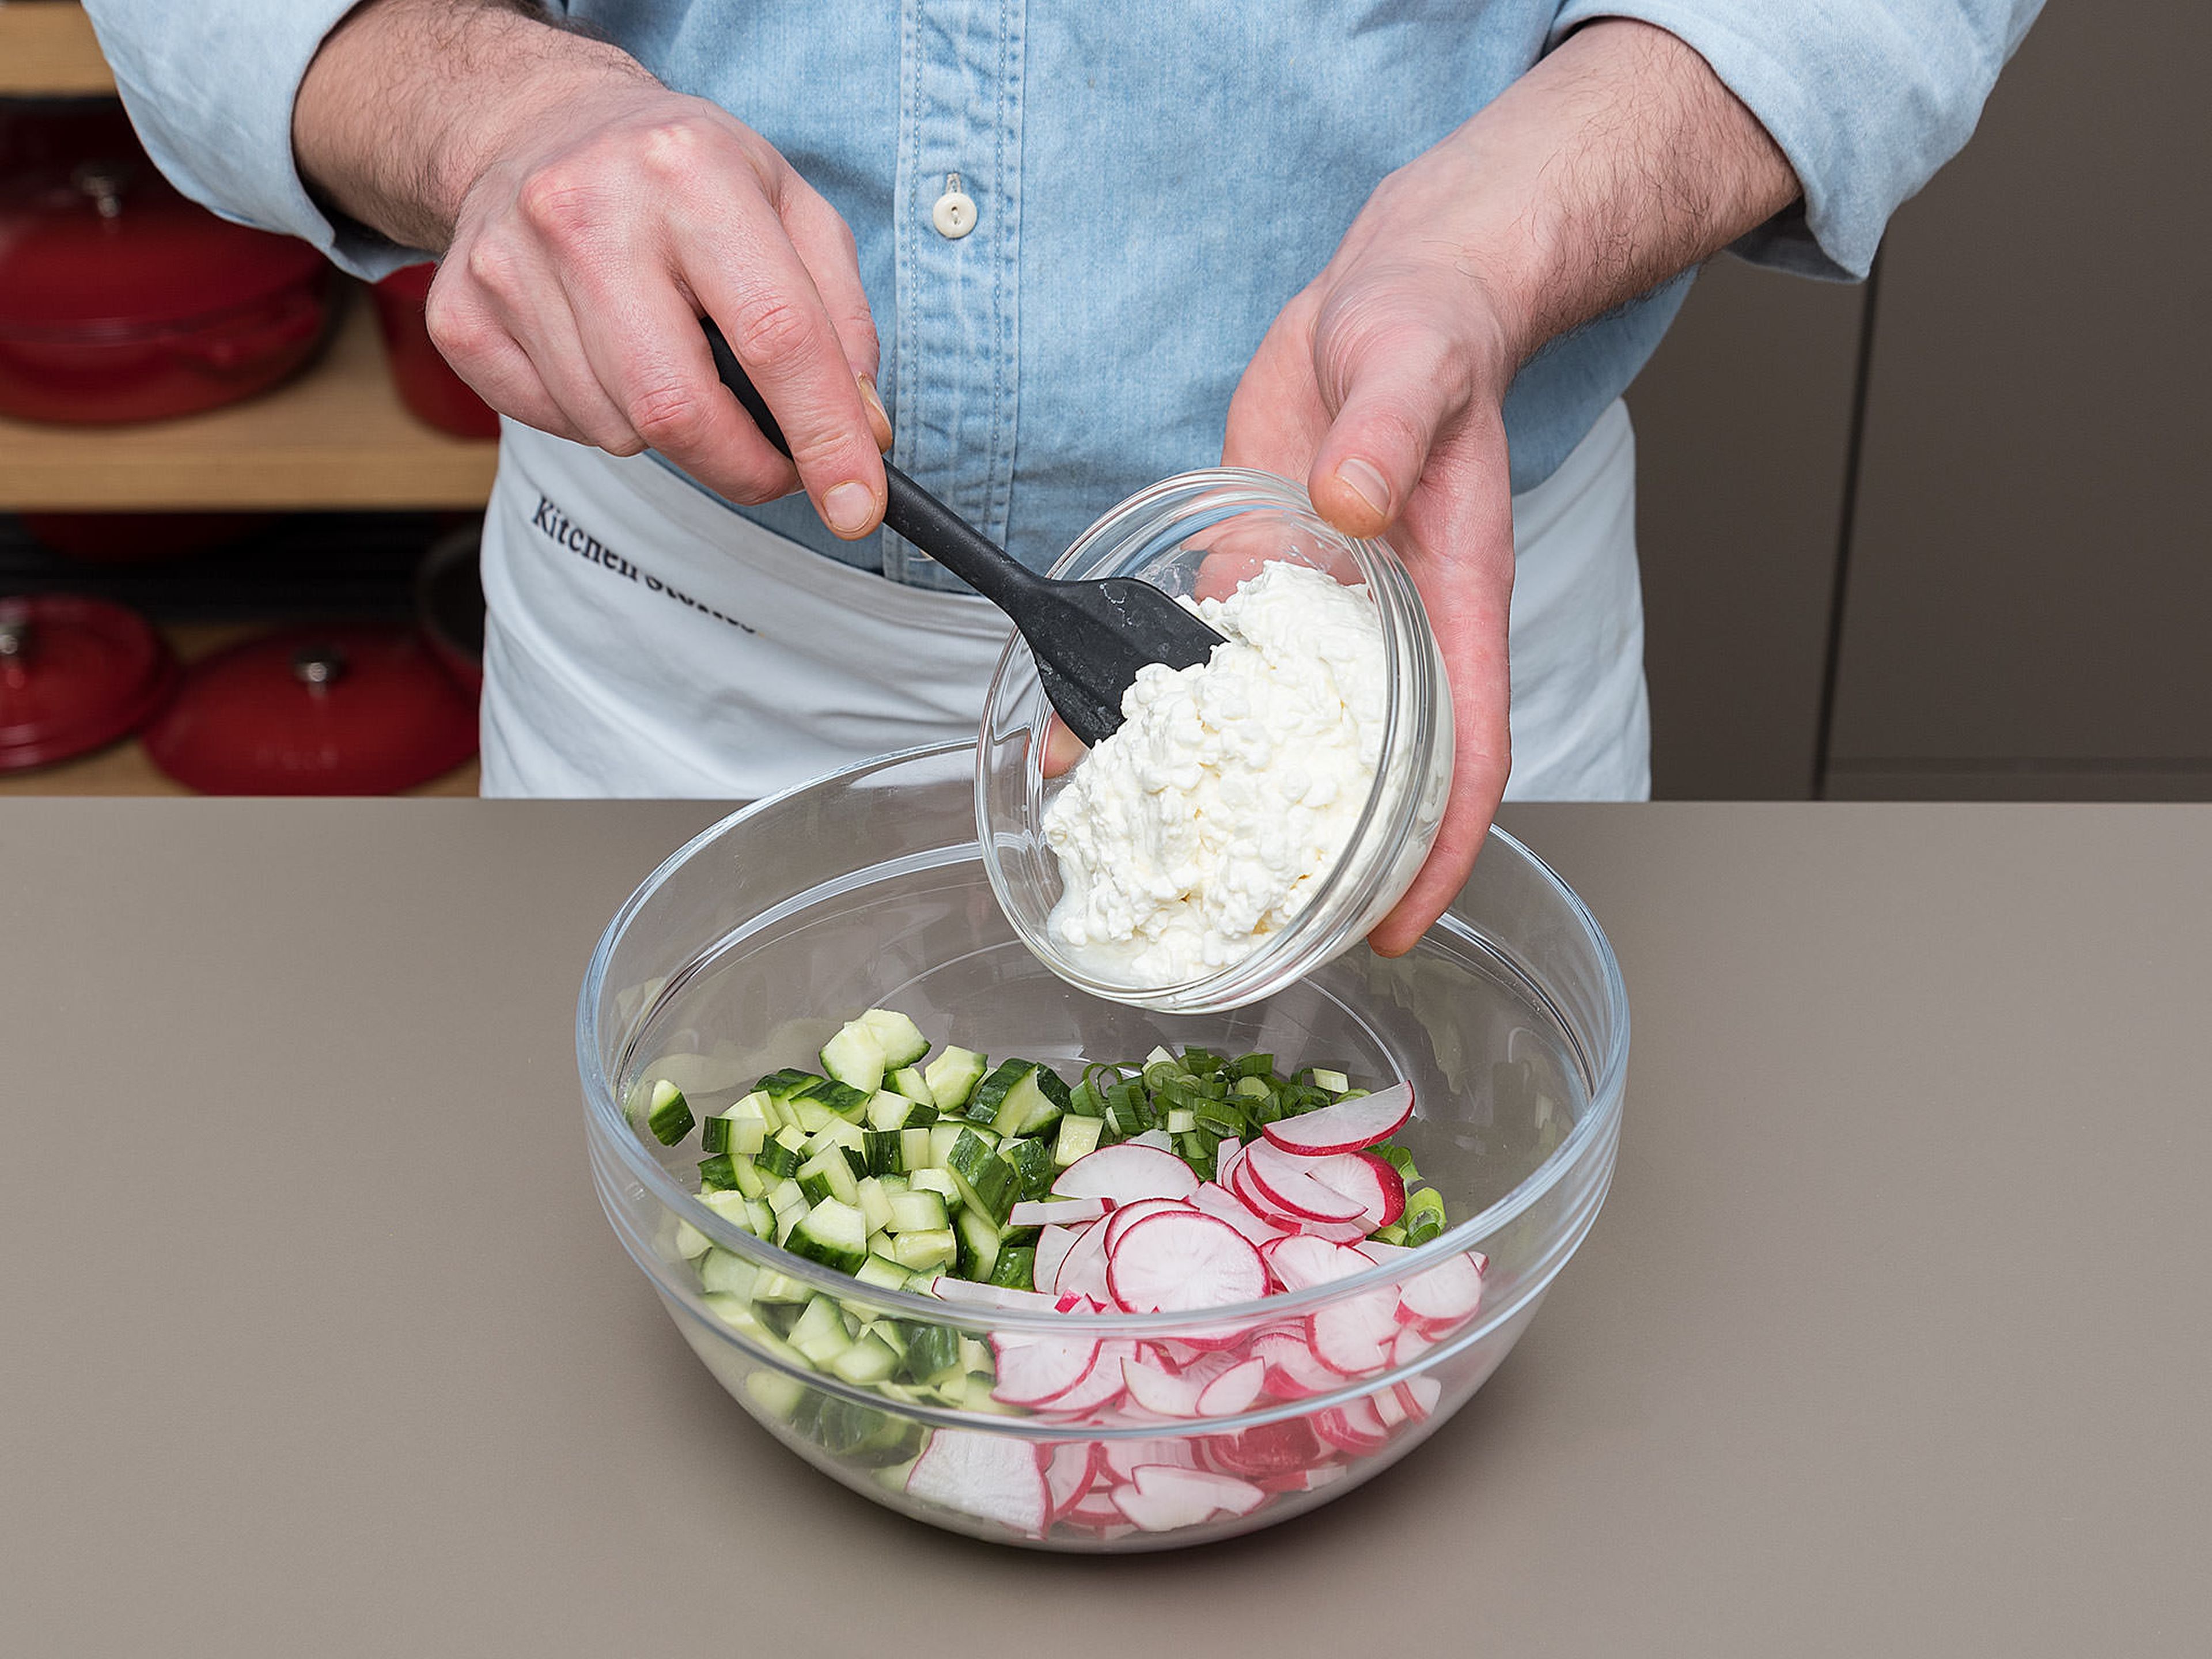 Peel and halve cucumber and scrape out the seeds with a spoon. Then, quarter the halves and cut them into small pieces. Clean radishes and green onions, then cut both into thin rings. In a bowl, mix the cucumber, green onions, and radish with cottage cheese. Season to taste with salt and pepper.